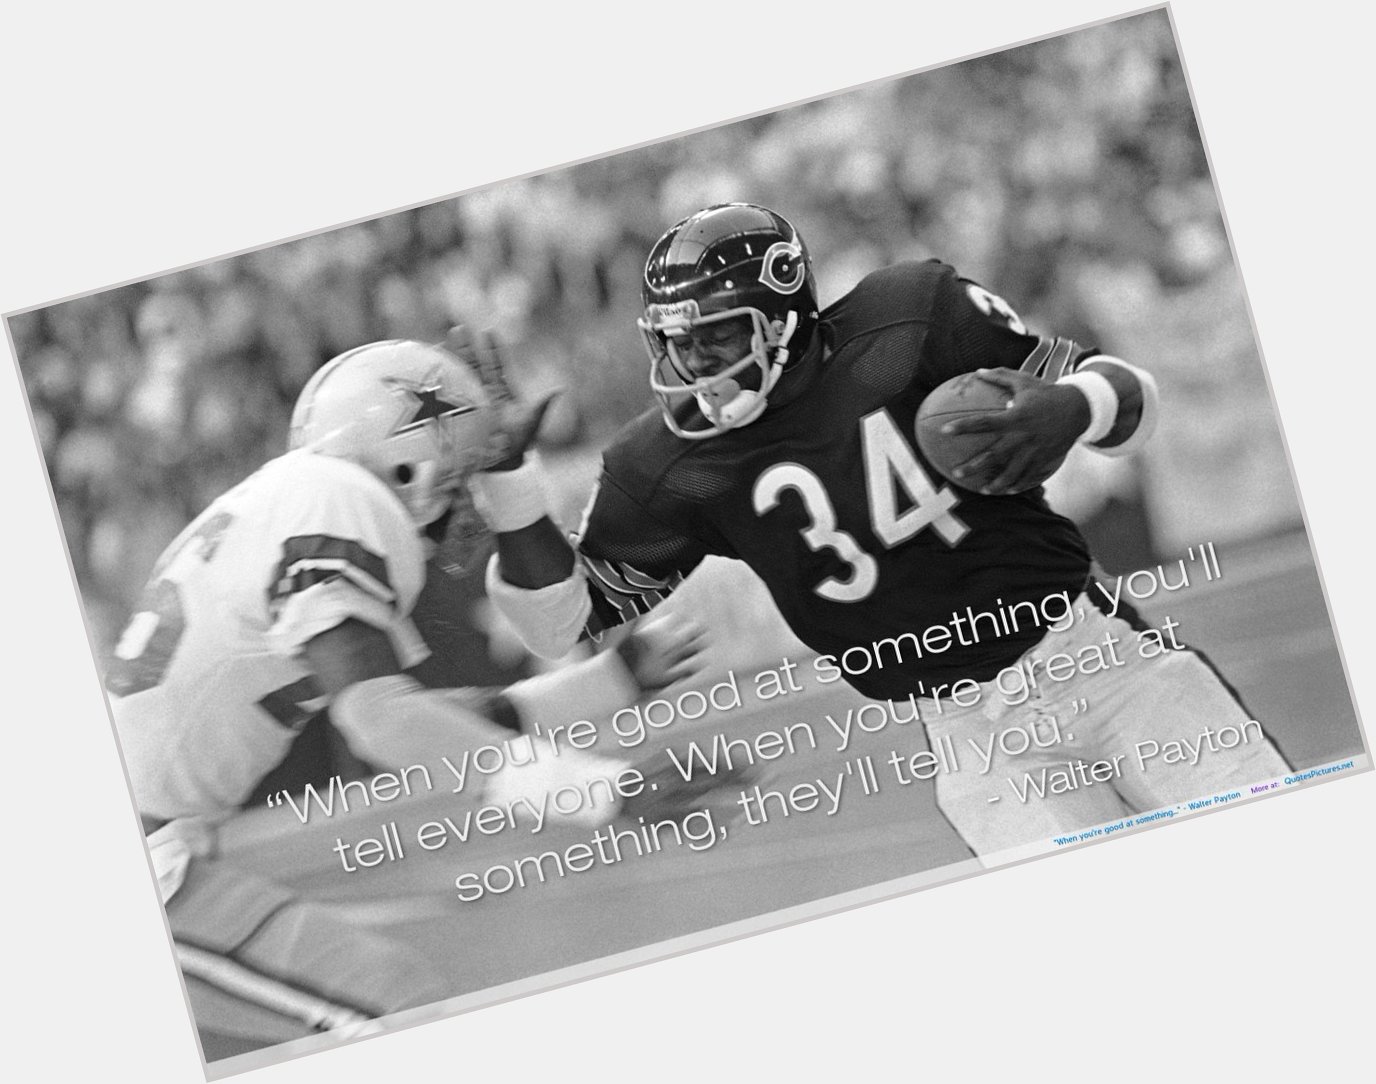  says Happy Bday to Walter Payton. He was but was he the best RB ever?
Re-message 4 Yes
Fav 4 No 